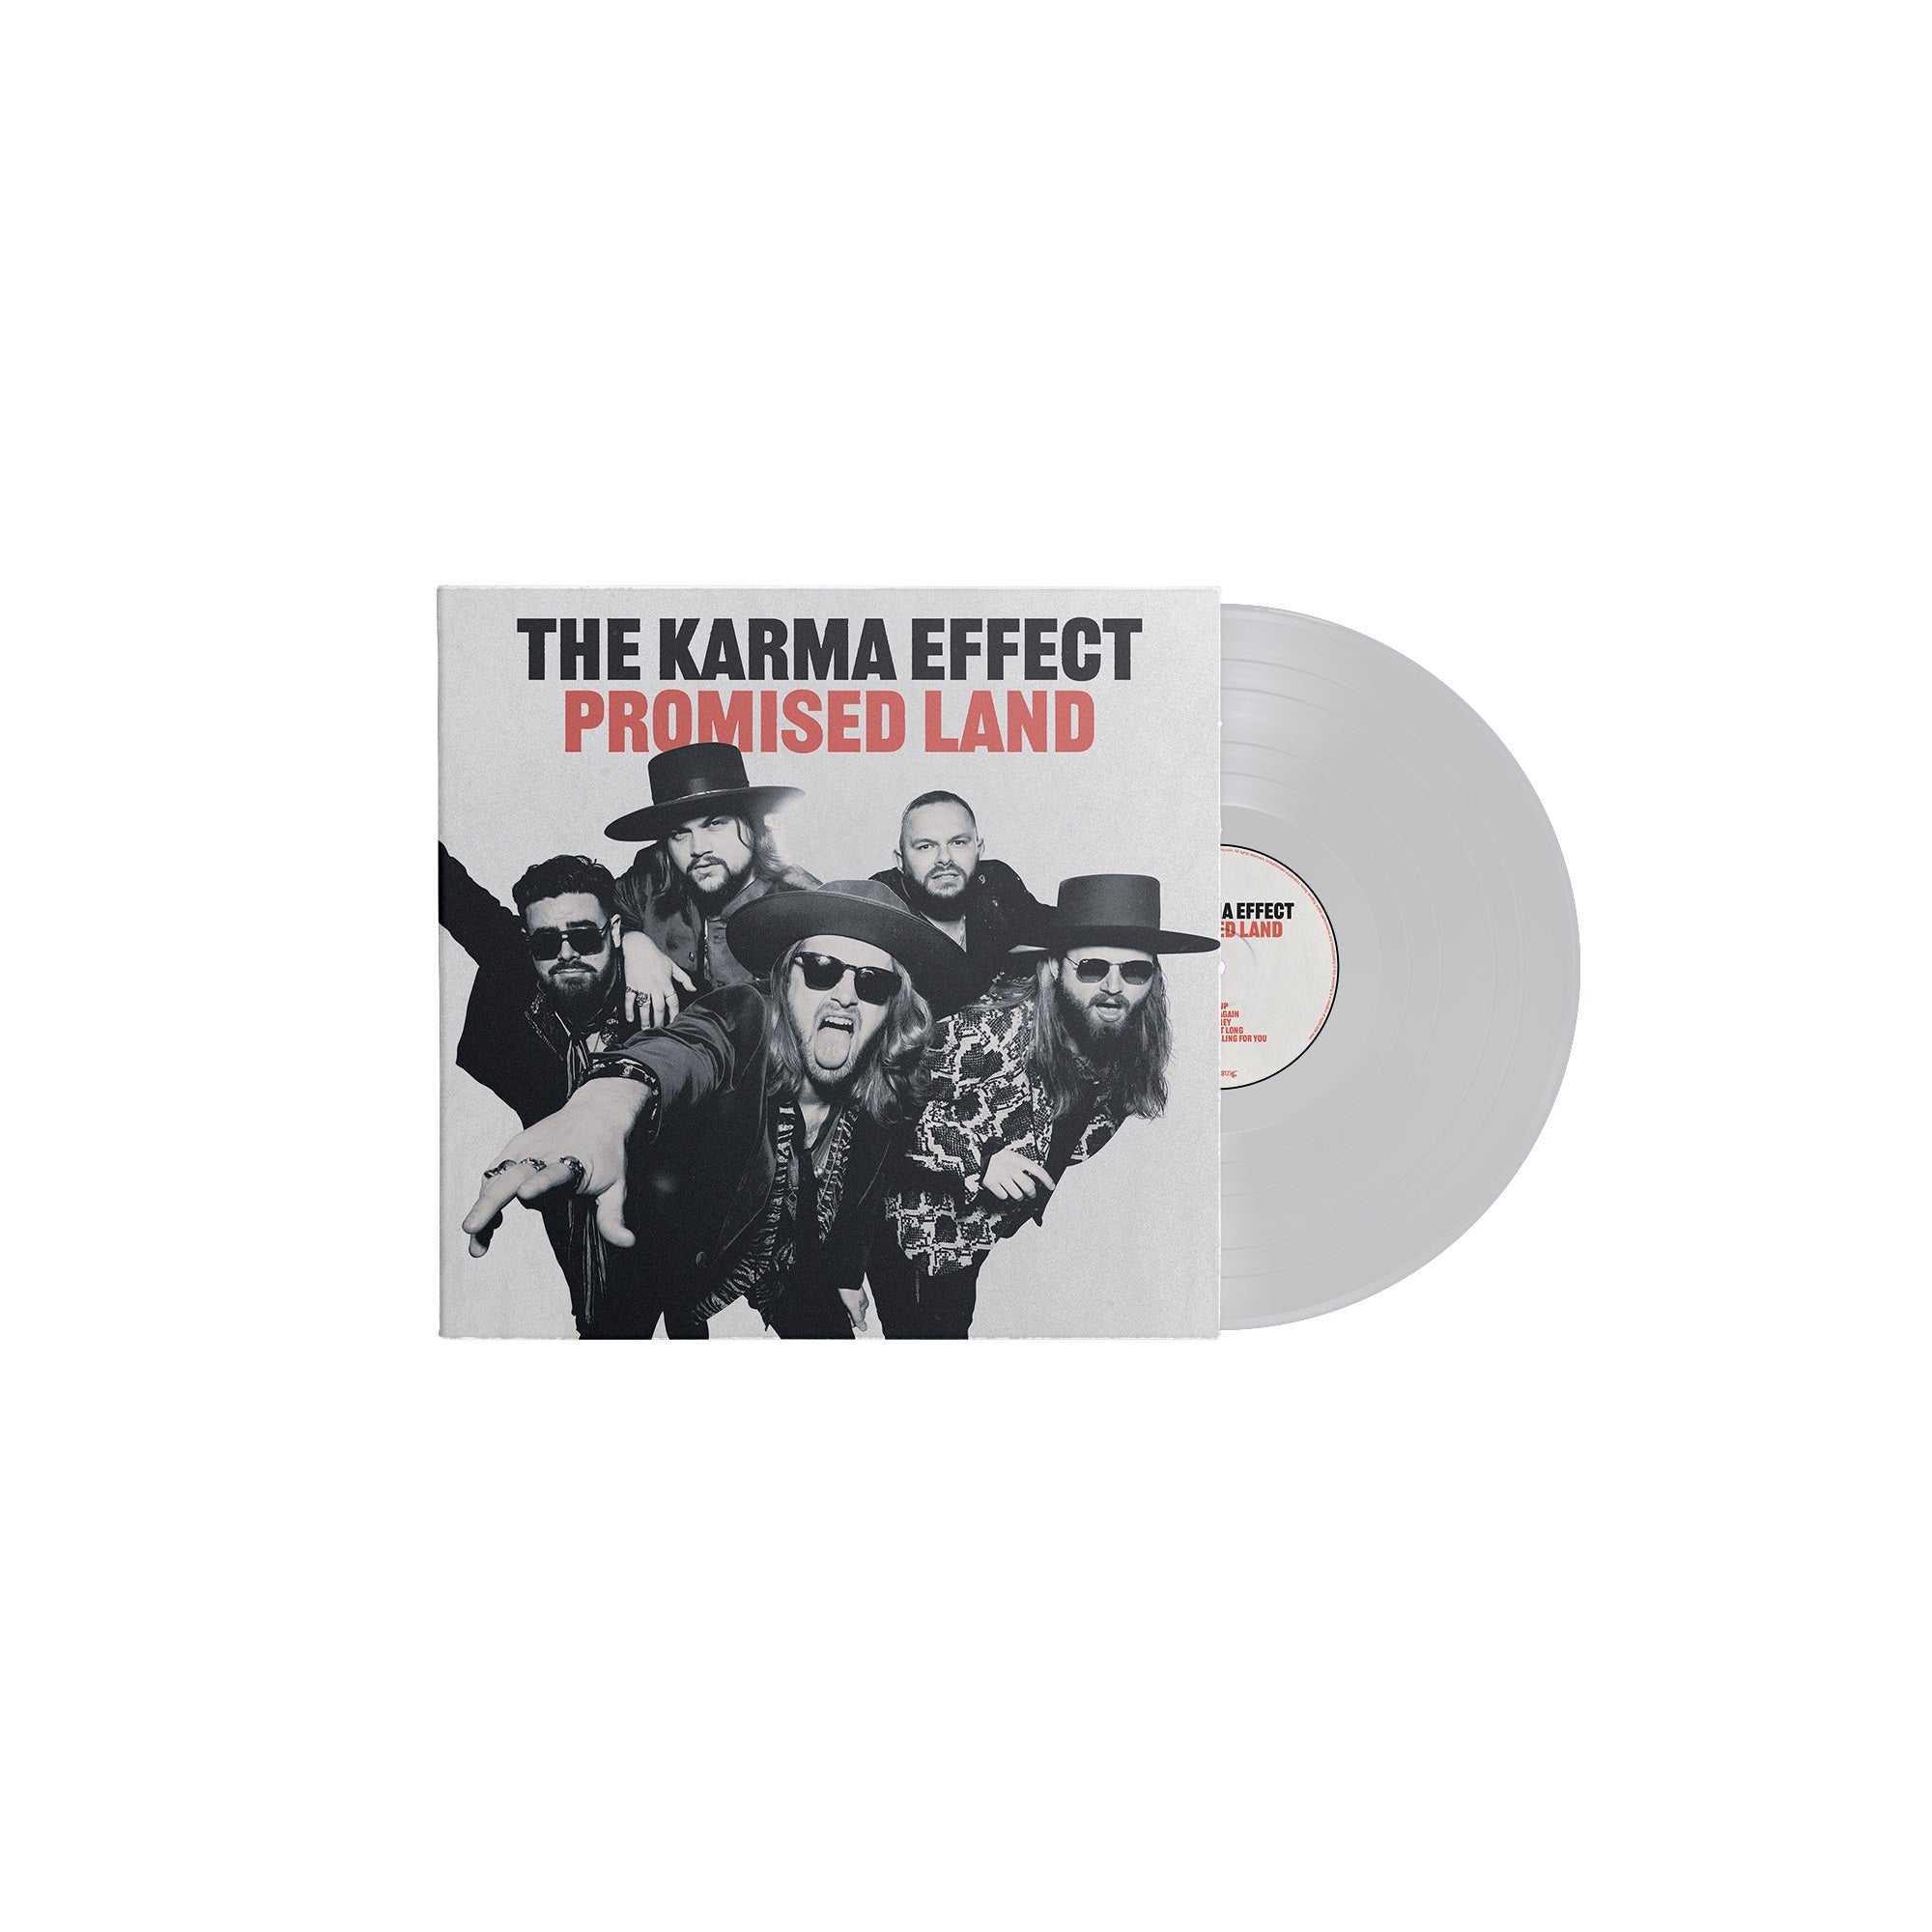 The Karma Effect "Promised Land" Clear Vinyl